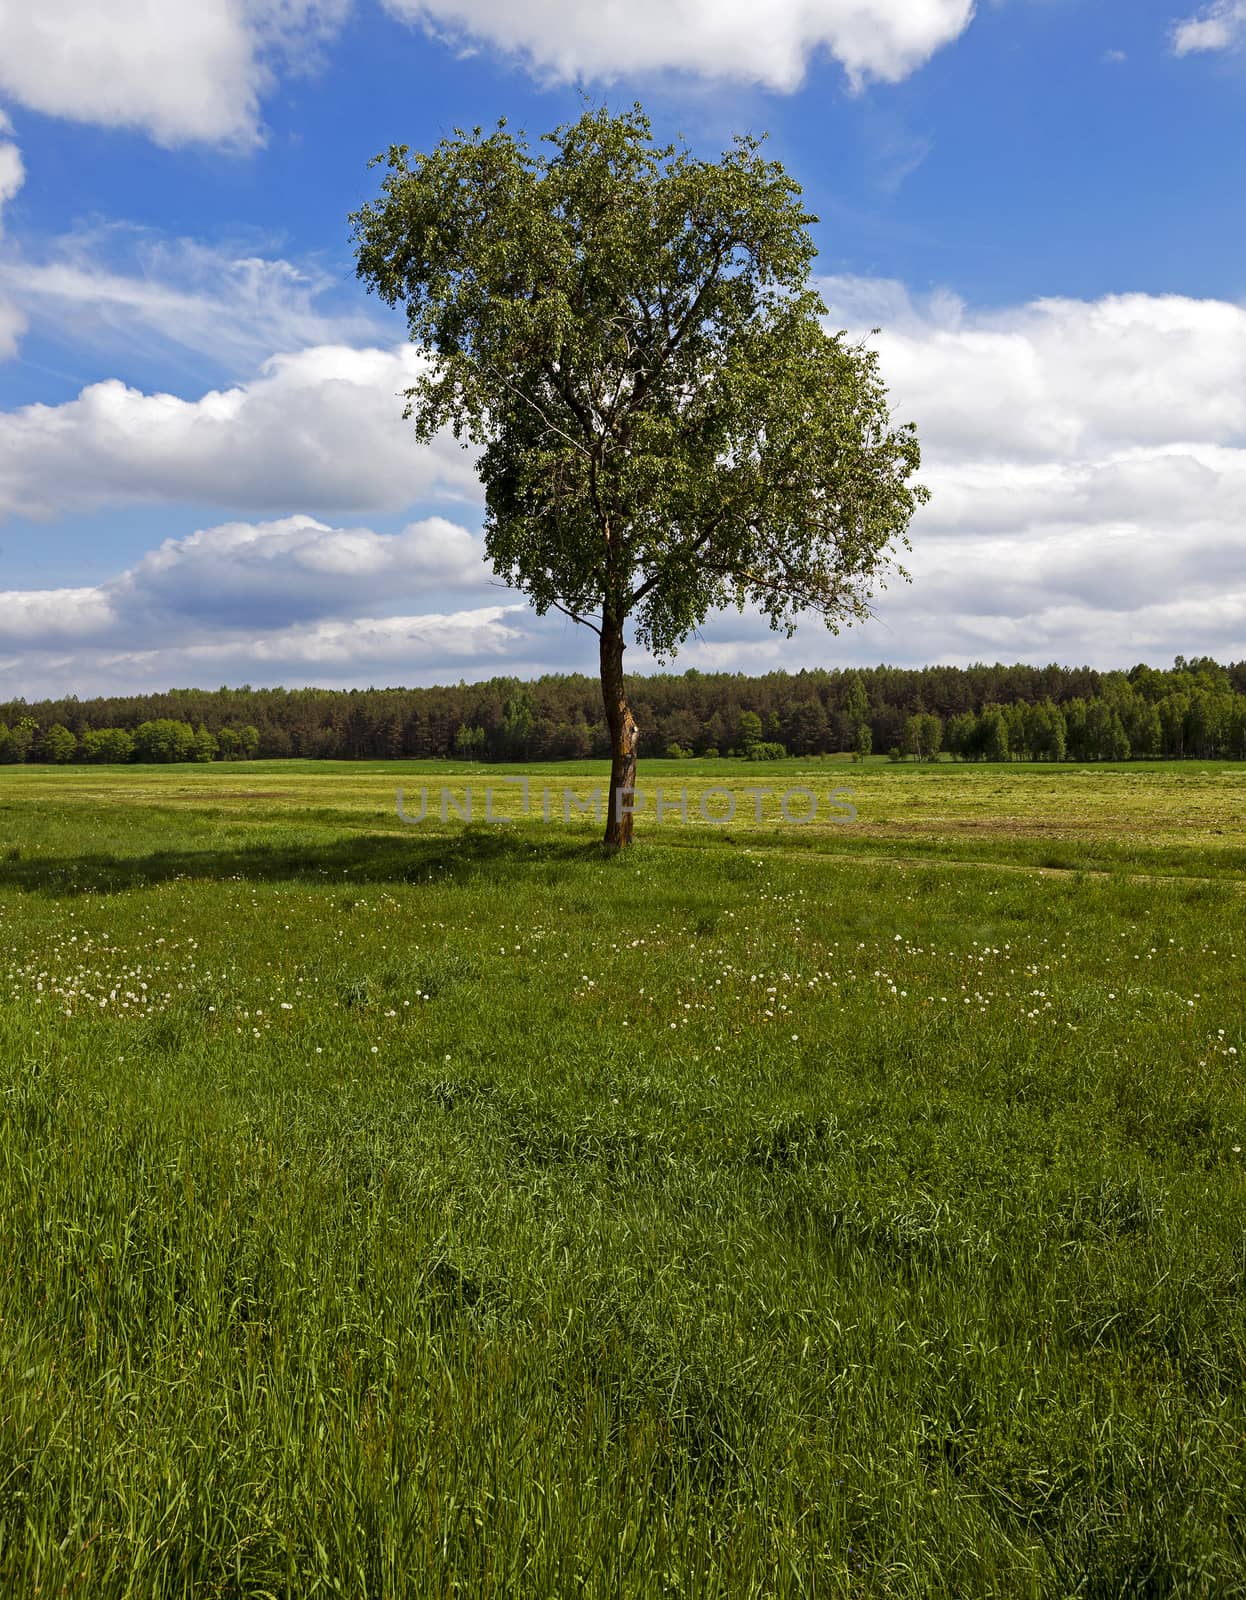  the tree of a birch growing in a field on which grow up plants